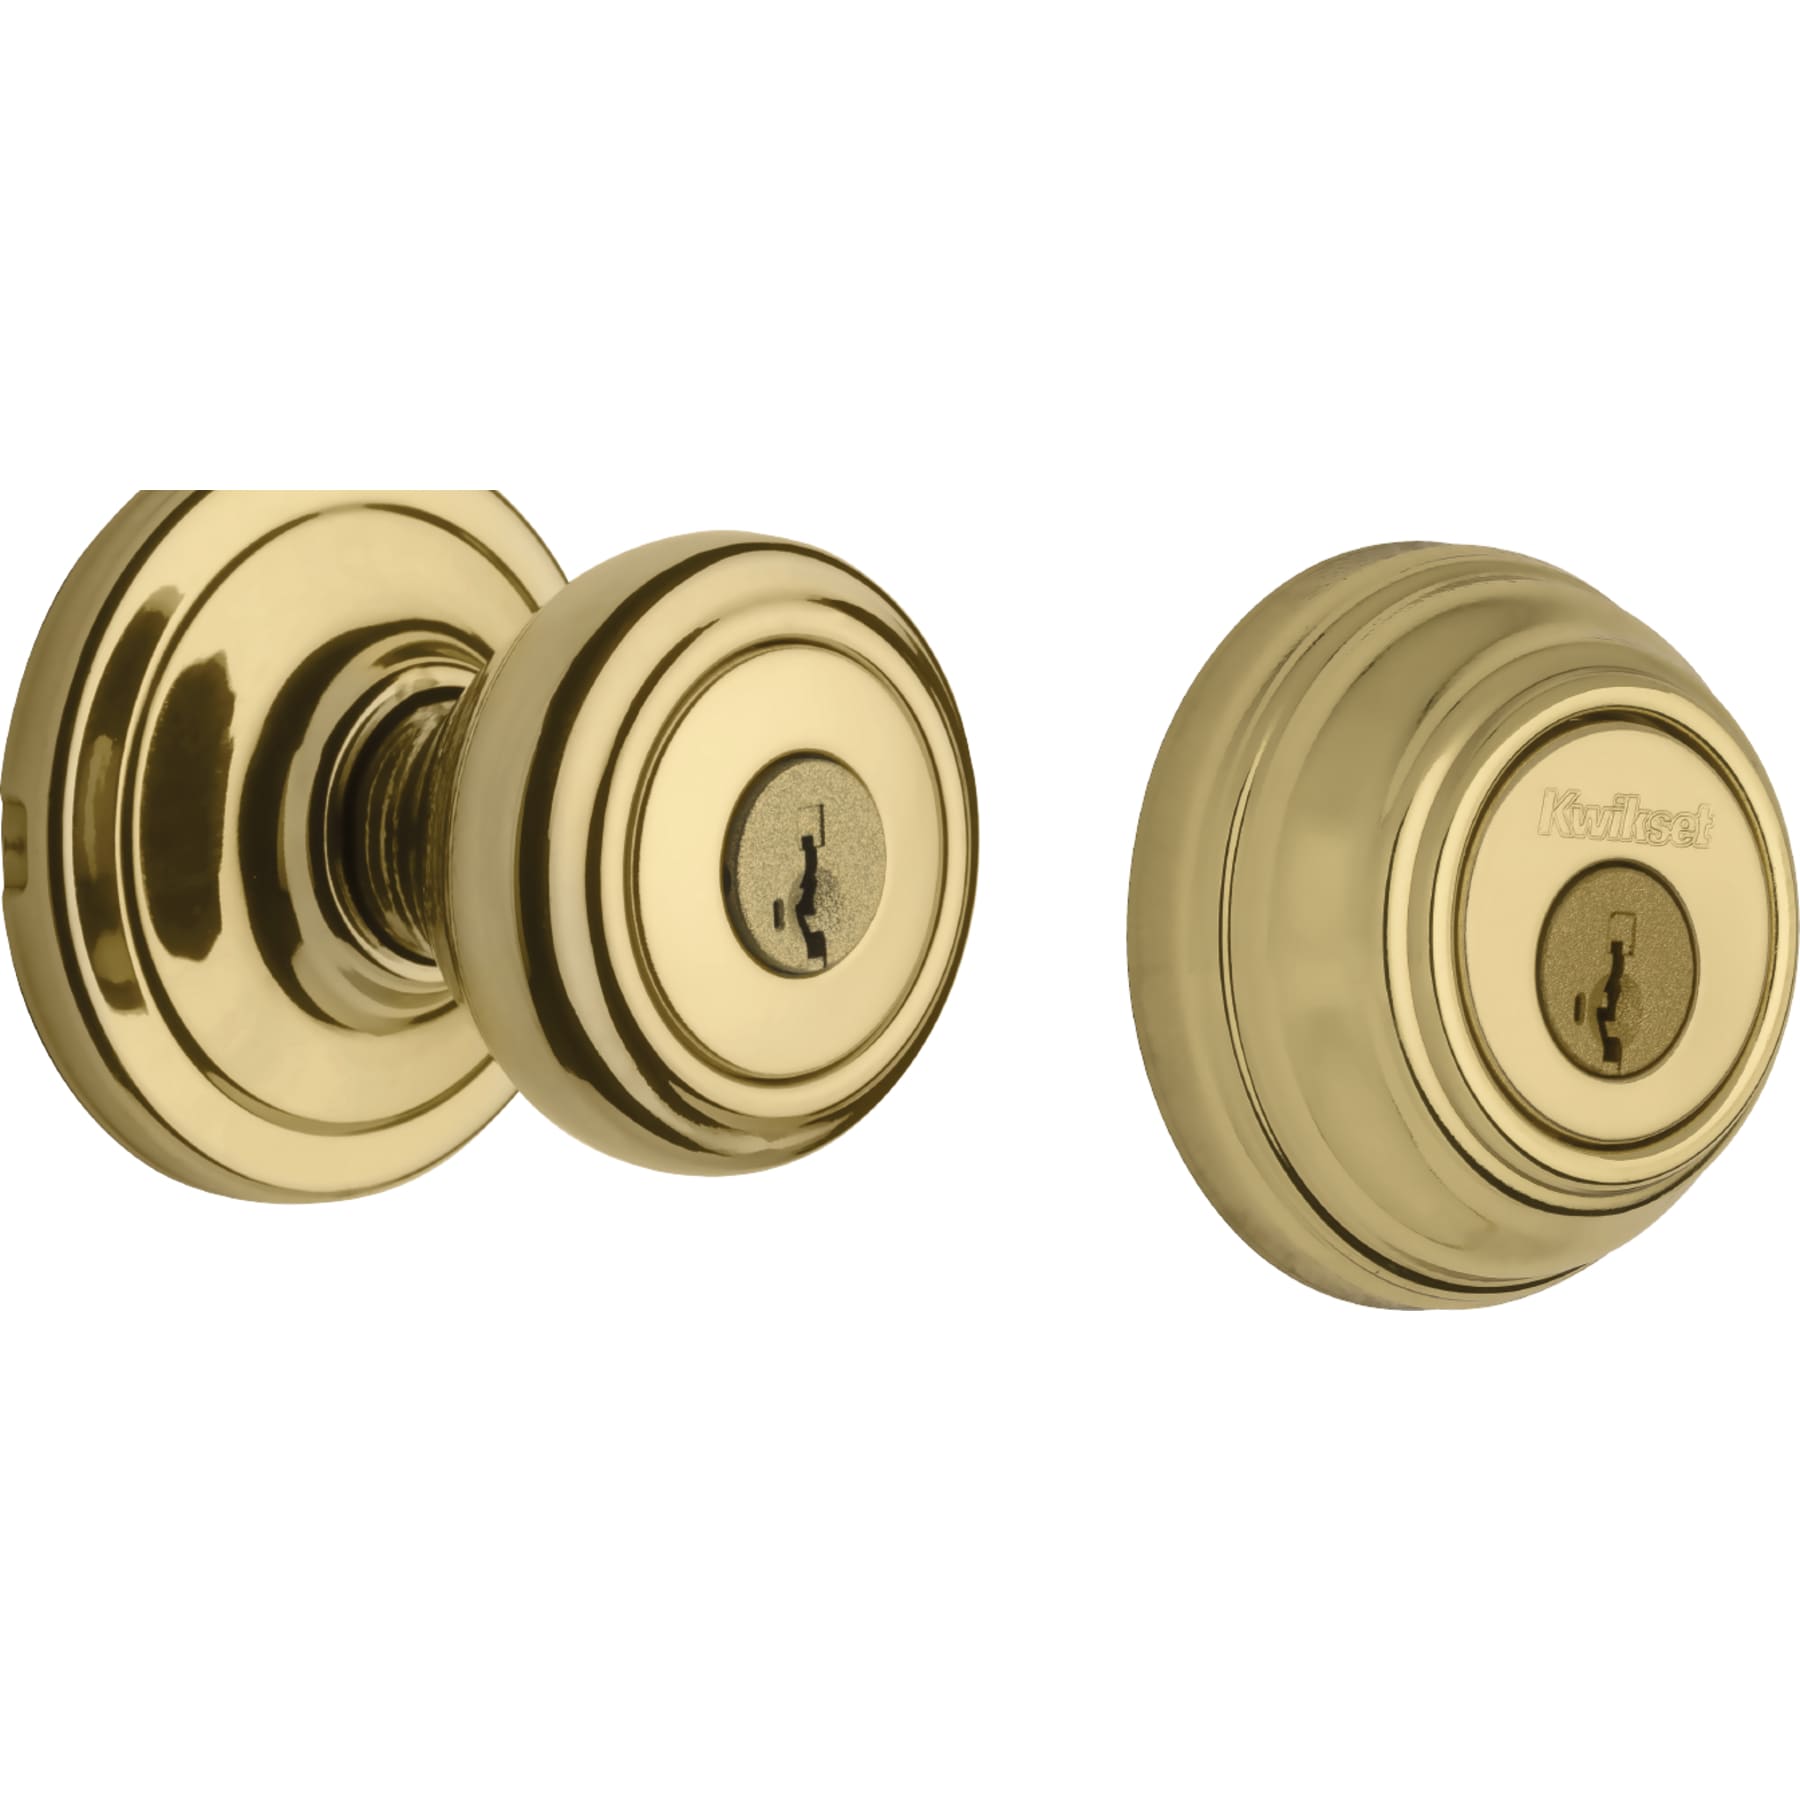 Kwikset 991 Juno Entry Knob and Single Cylinder Deadbolt Combo Pack featuri - 3